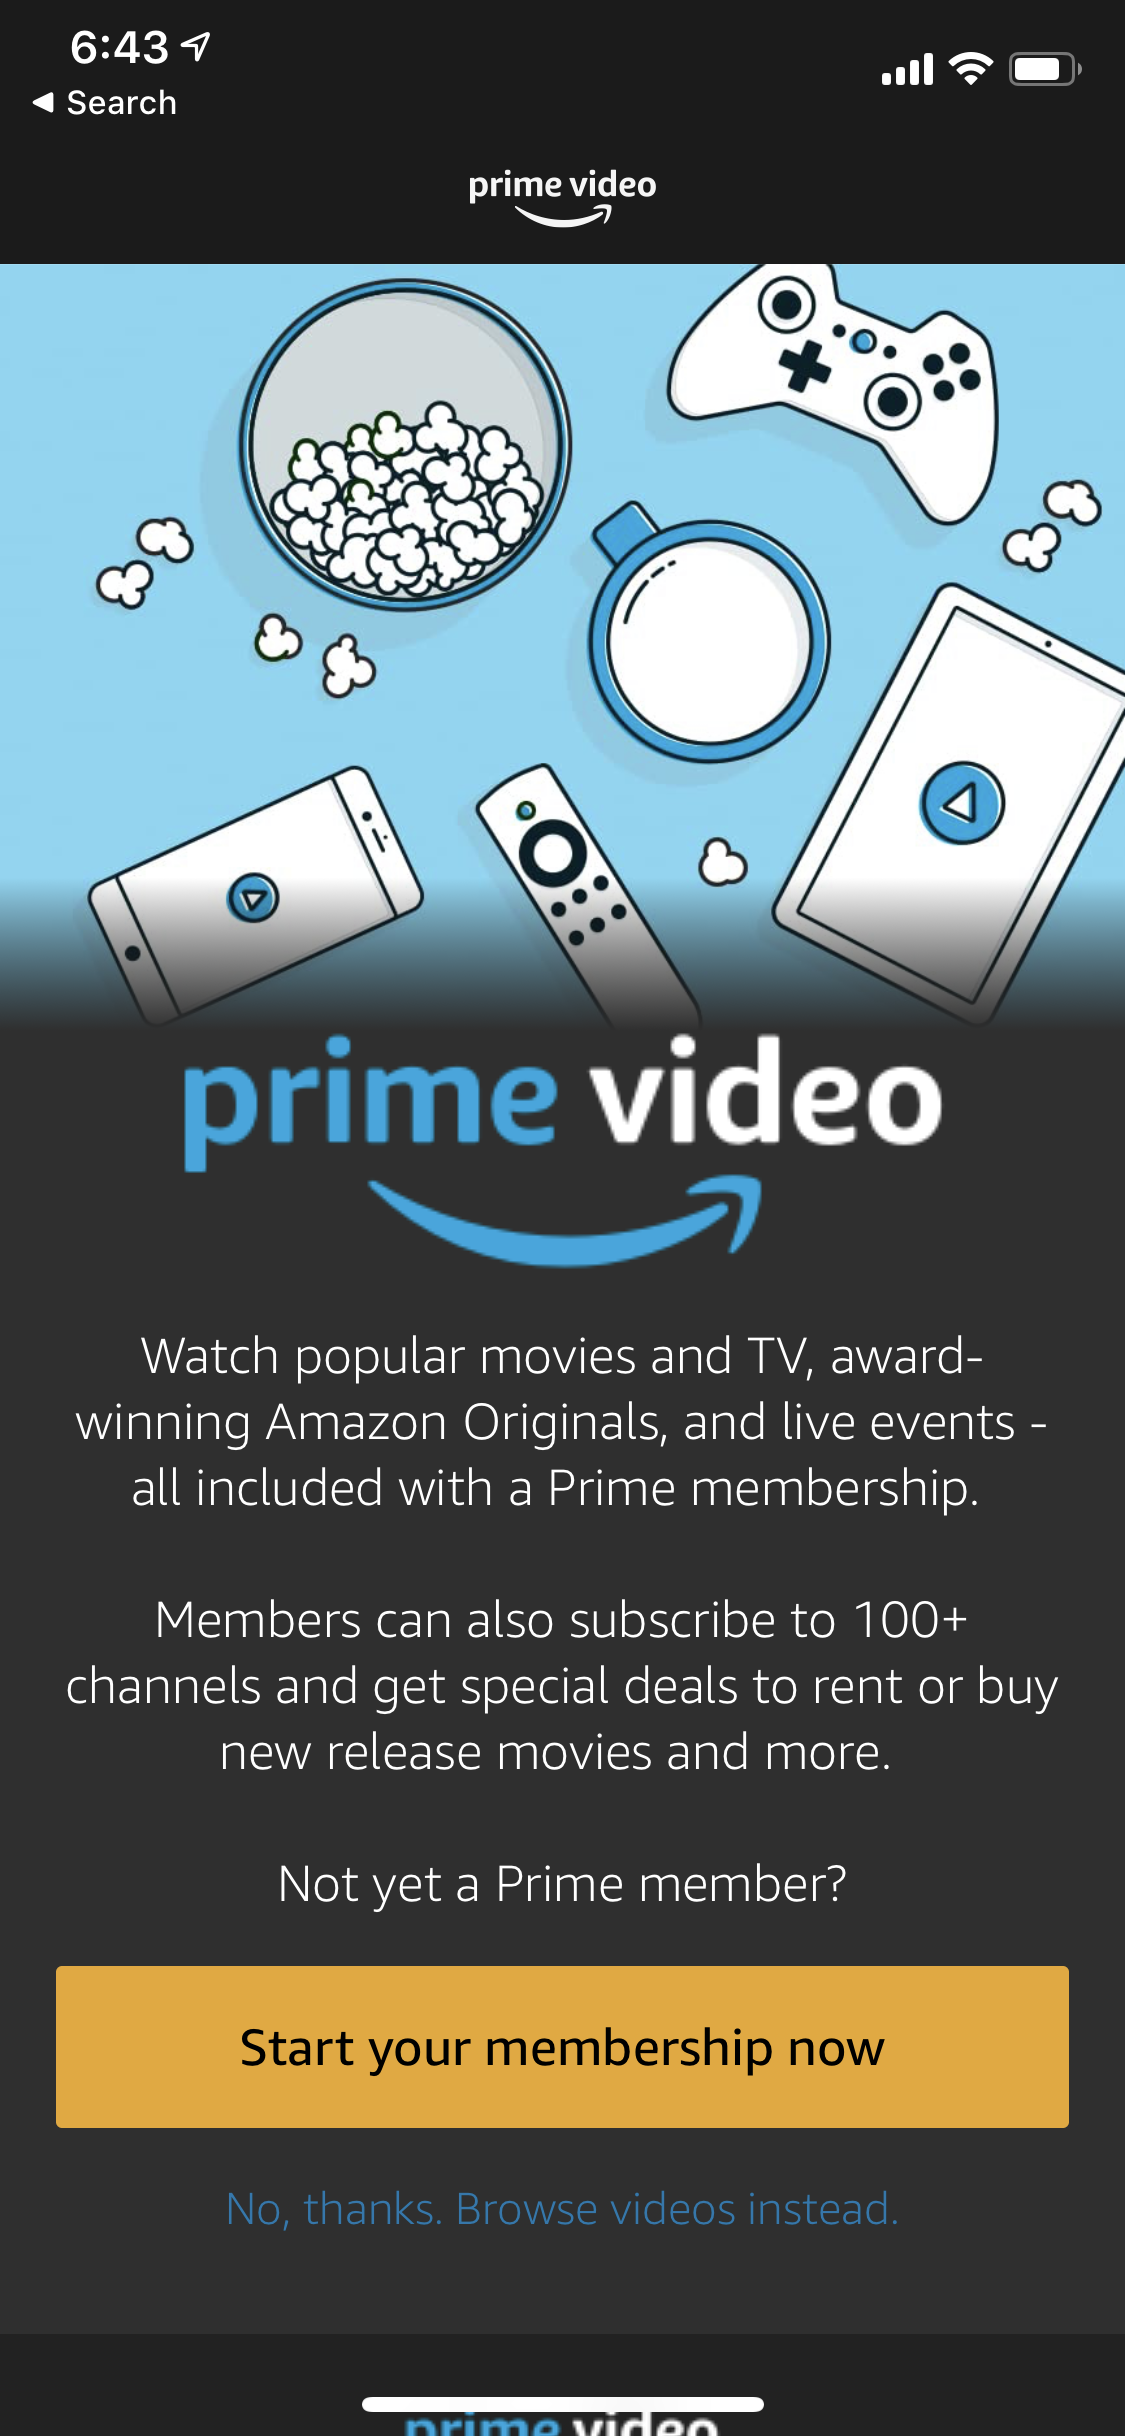 Daring Fireball Amazon And Apple Strike Deal For Prime Video In App Purchases And Subscriptions